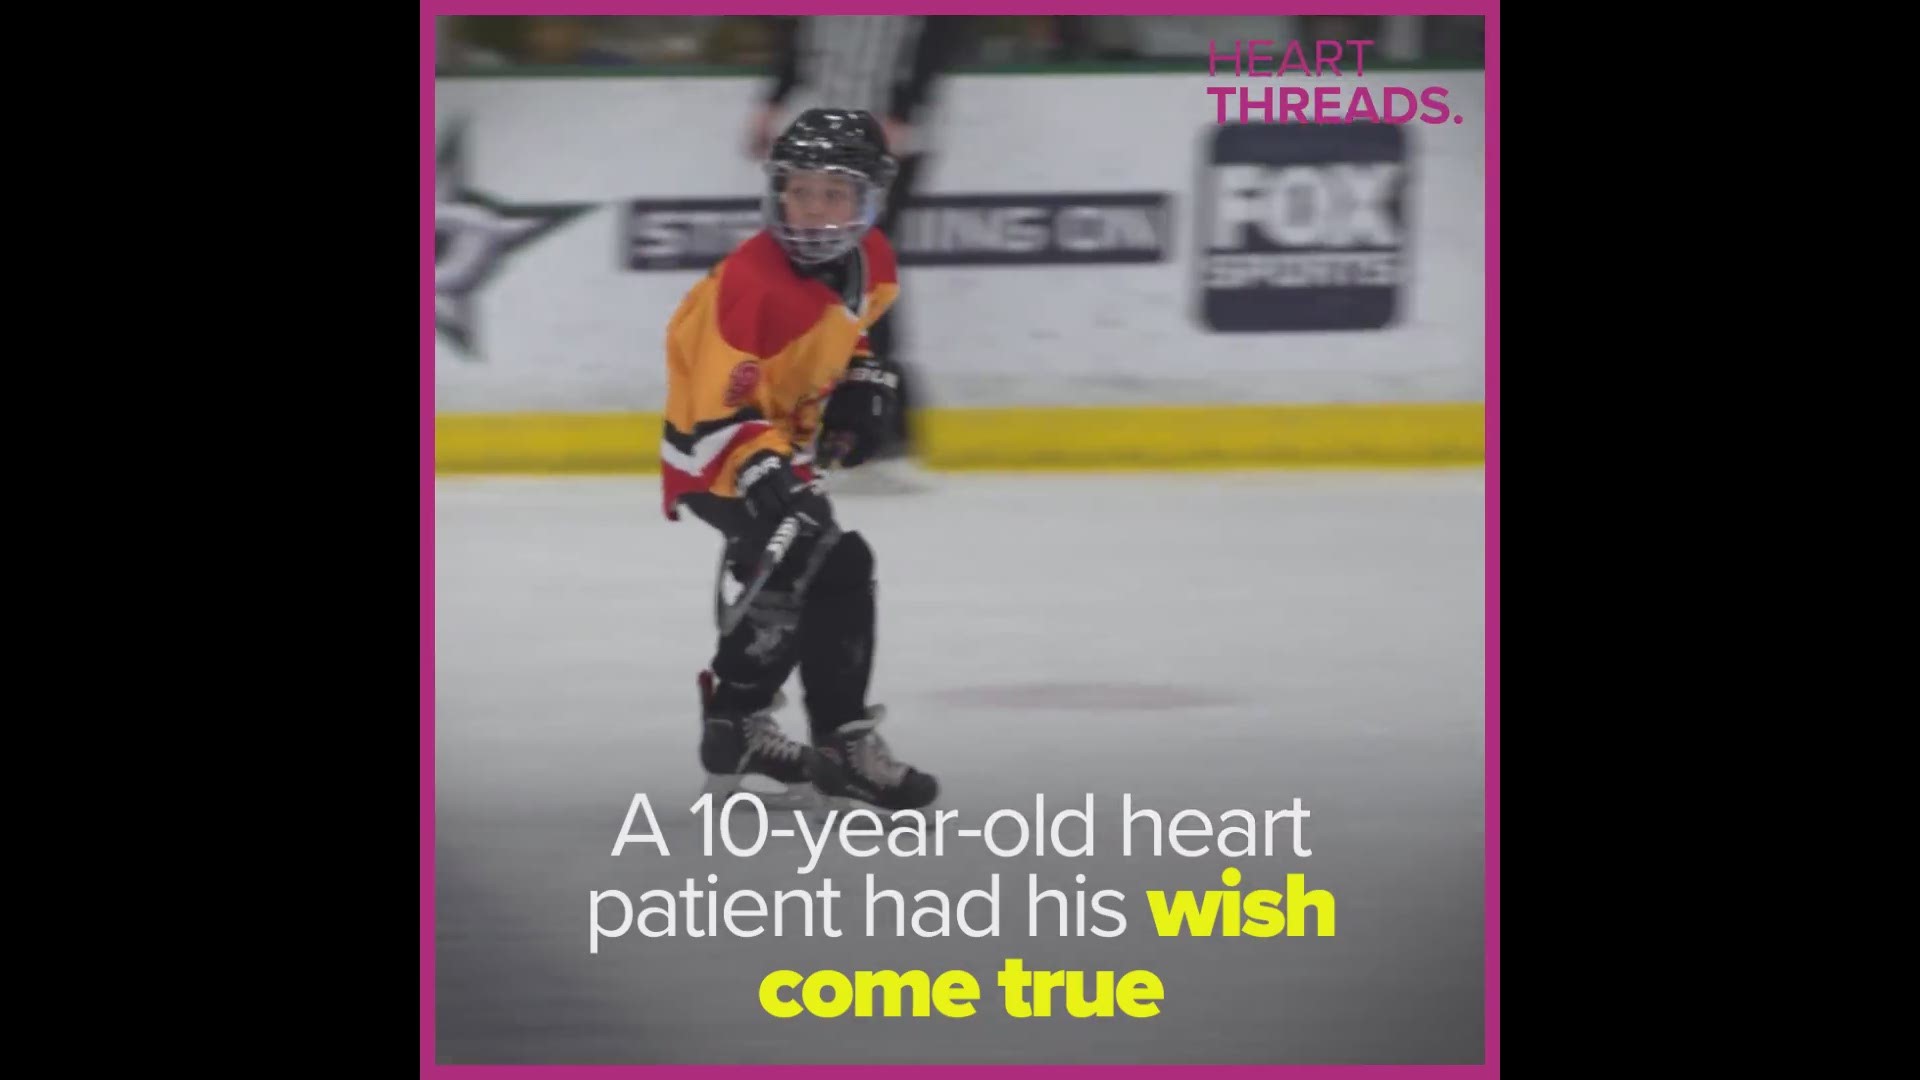 Doctors told 10-year-old Anderson McDuffie he couldn't play hockey because of his heart. But Anderson refuses to live life in a bubble.